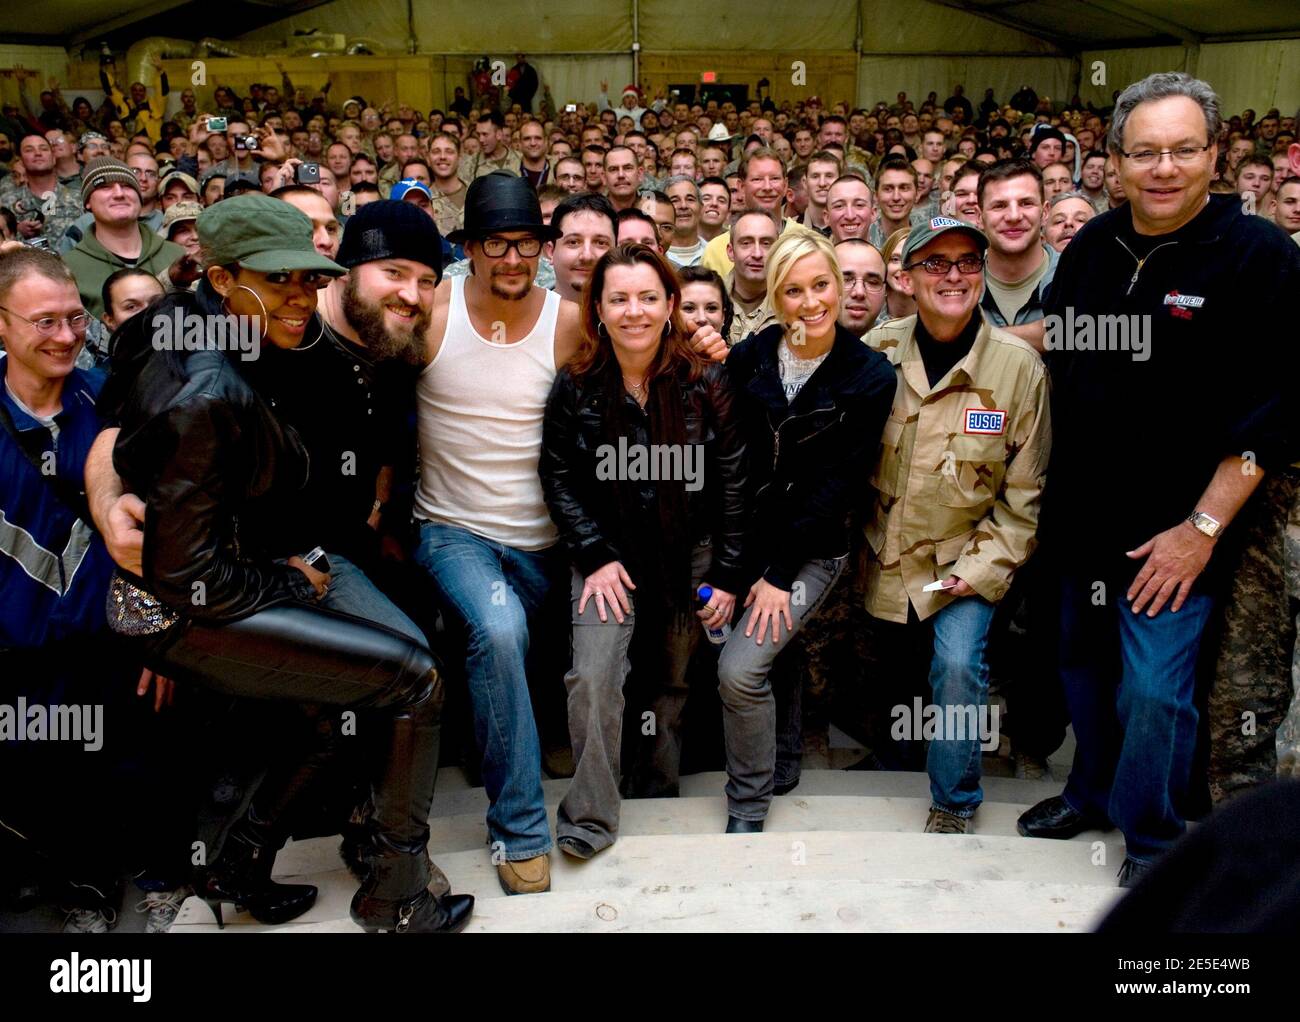 (L-R) Actress Tichina Arnold, Zack Brown, Kid Rock, comedian Kathleen Madigan, American Idol contestant Kellie Pickler and comedians John Bowman and Lewis Black pose for photos with service members after performing at Forward Operating Base Sharana in Kandahar, Afghanistan on December 17, 2008, during the 2008 USO Holiday Tour. Photo by Chad J. McNeeley/DOD/ABACAPRESS.COM Stock Photo